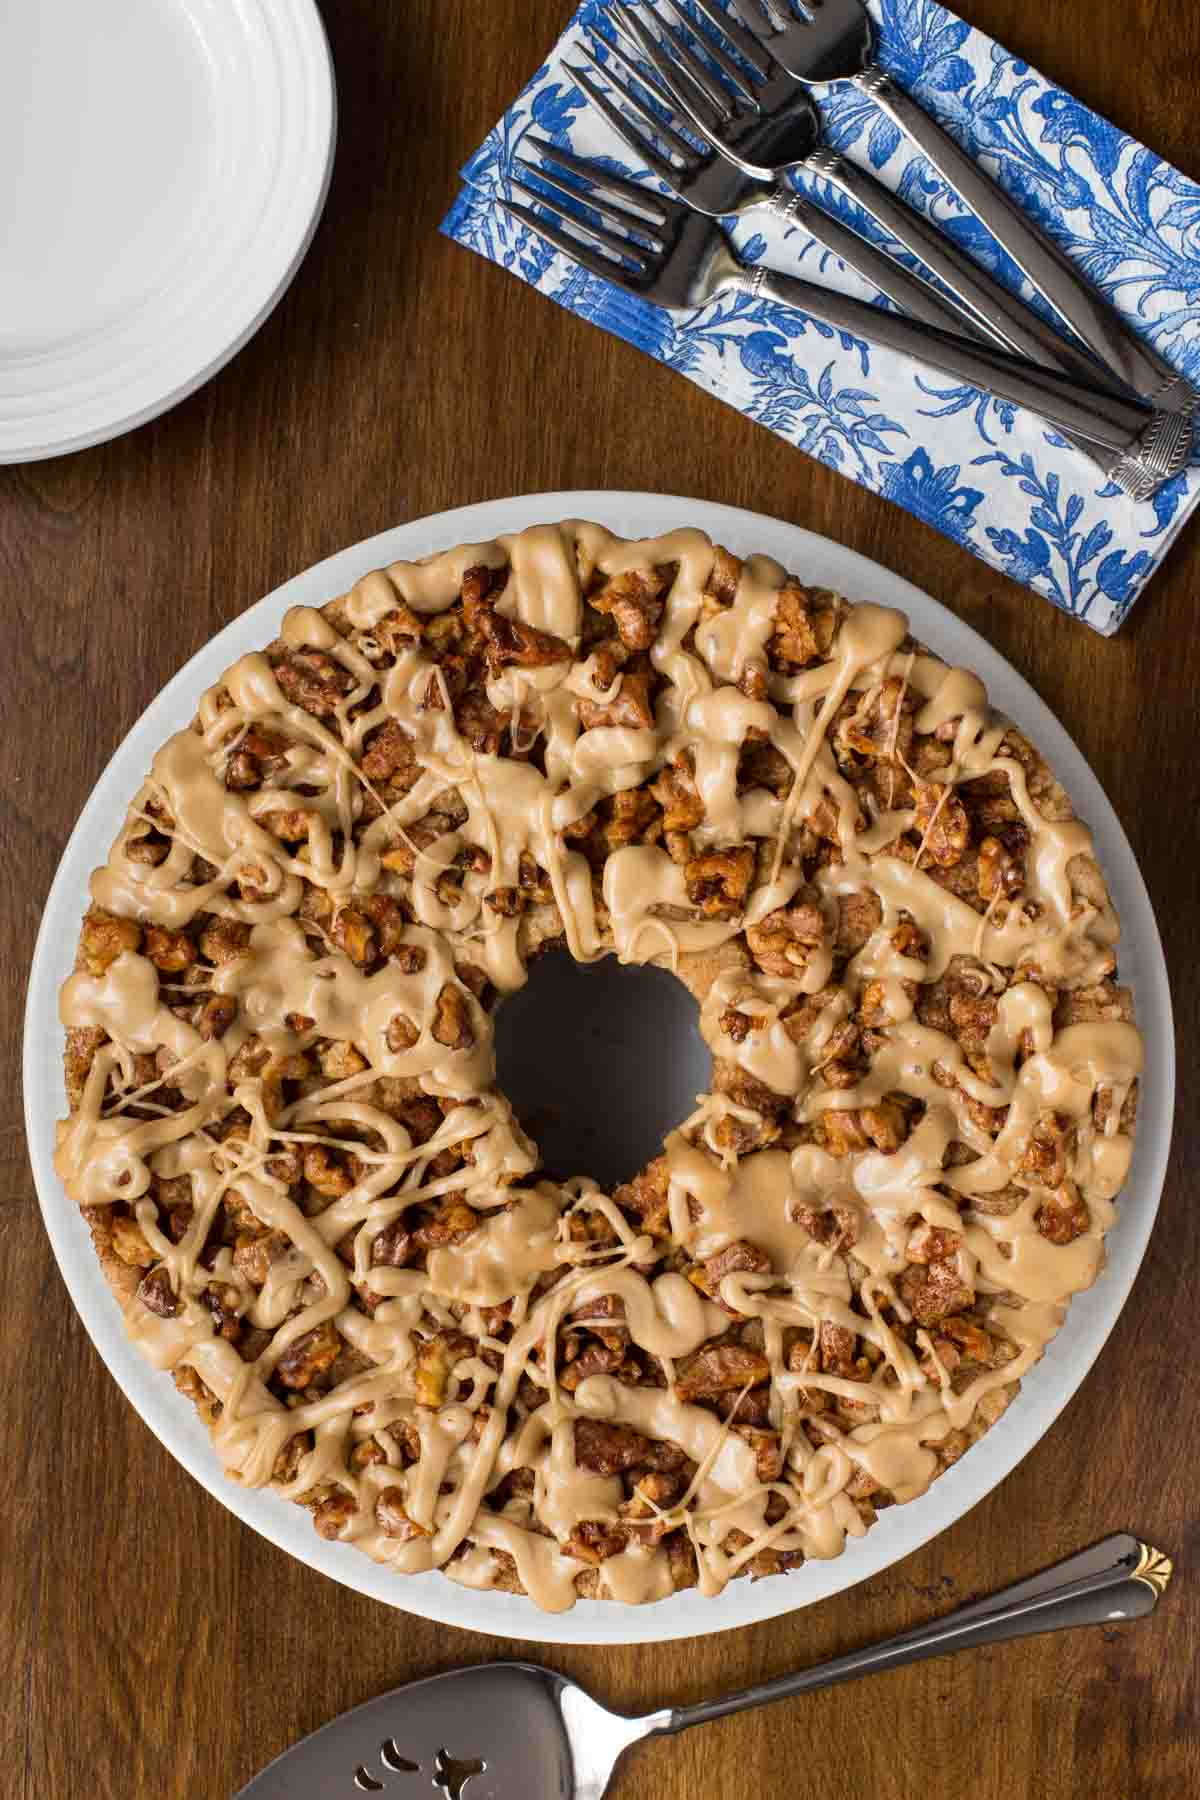 Overhead vertical photo of Maple Walnut Banana Coffee Cake on a white plate with blue and white patterned napkins.